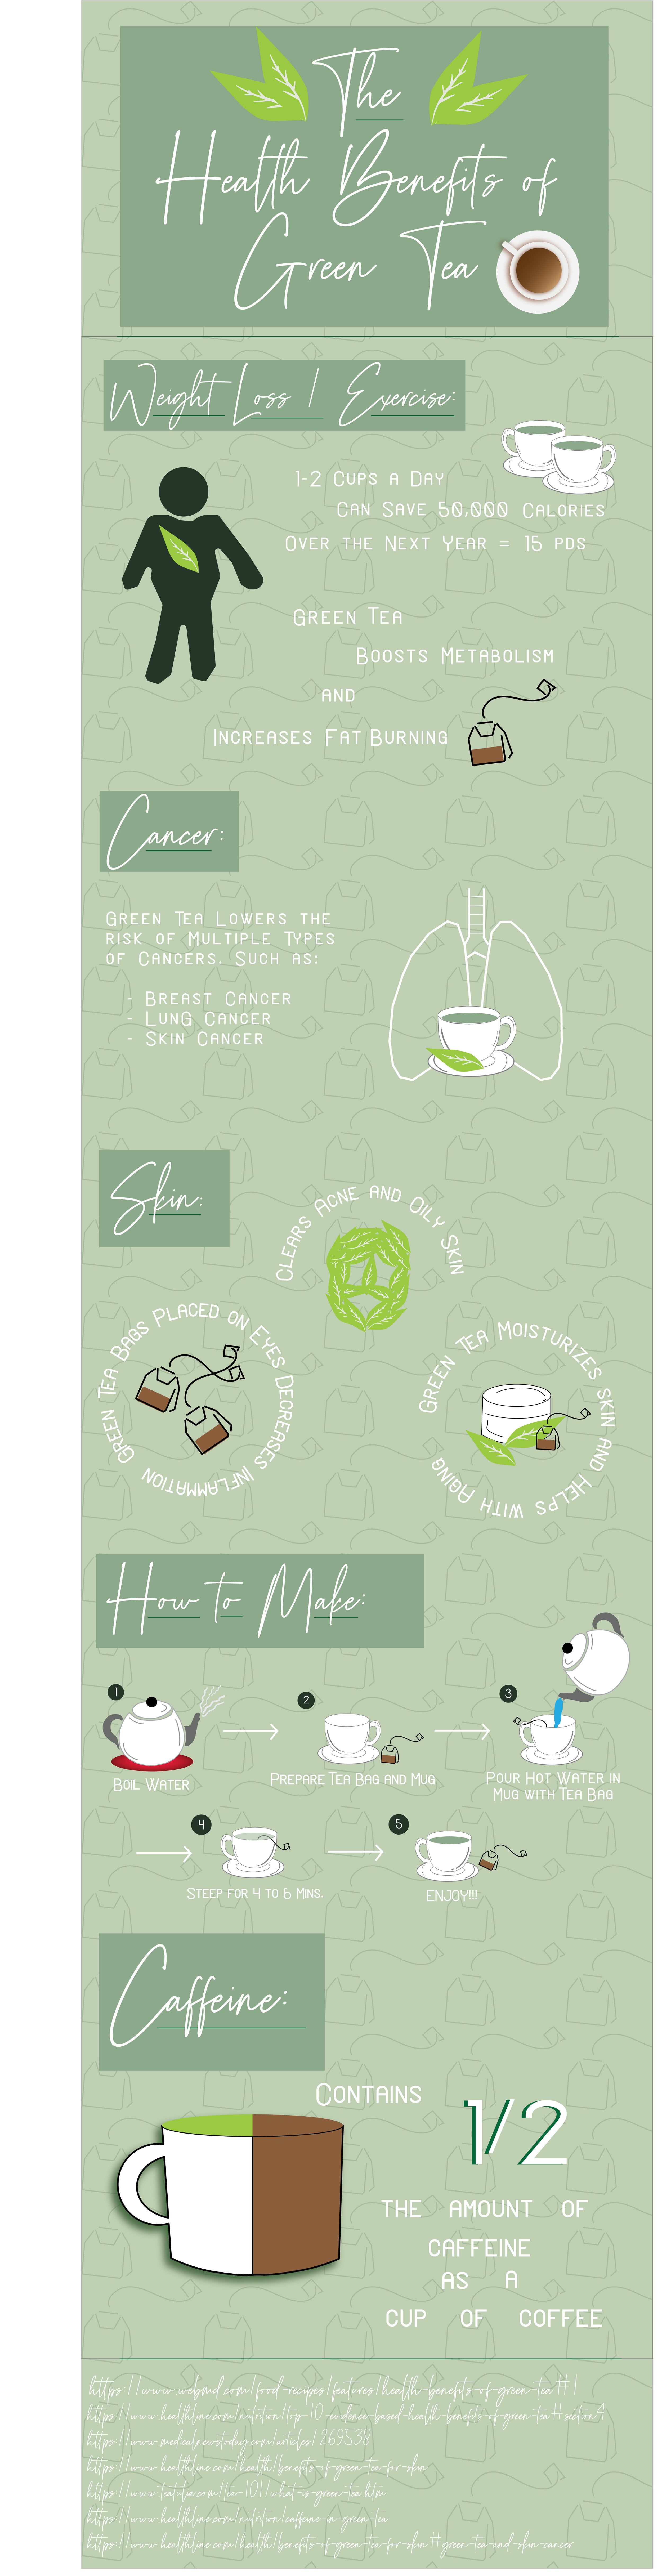   Infographic    The Health Benefits of Green Tea    2020  